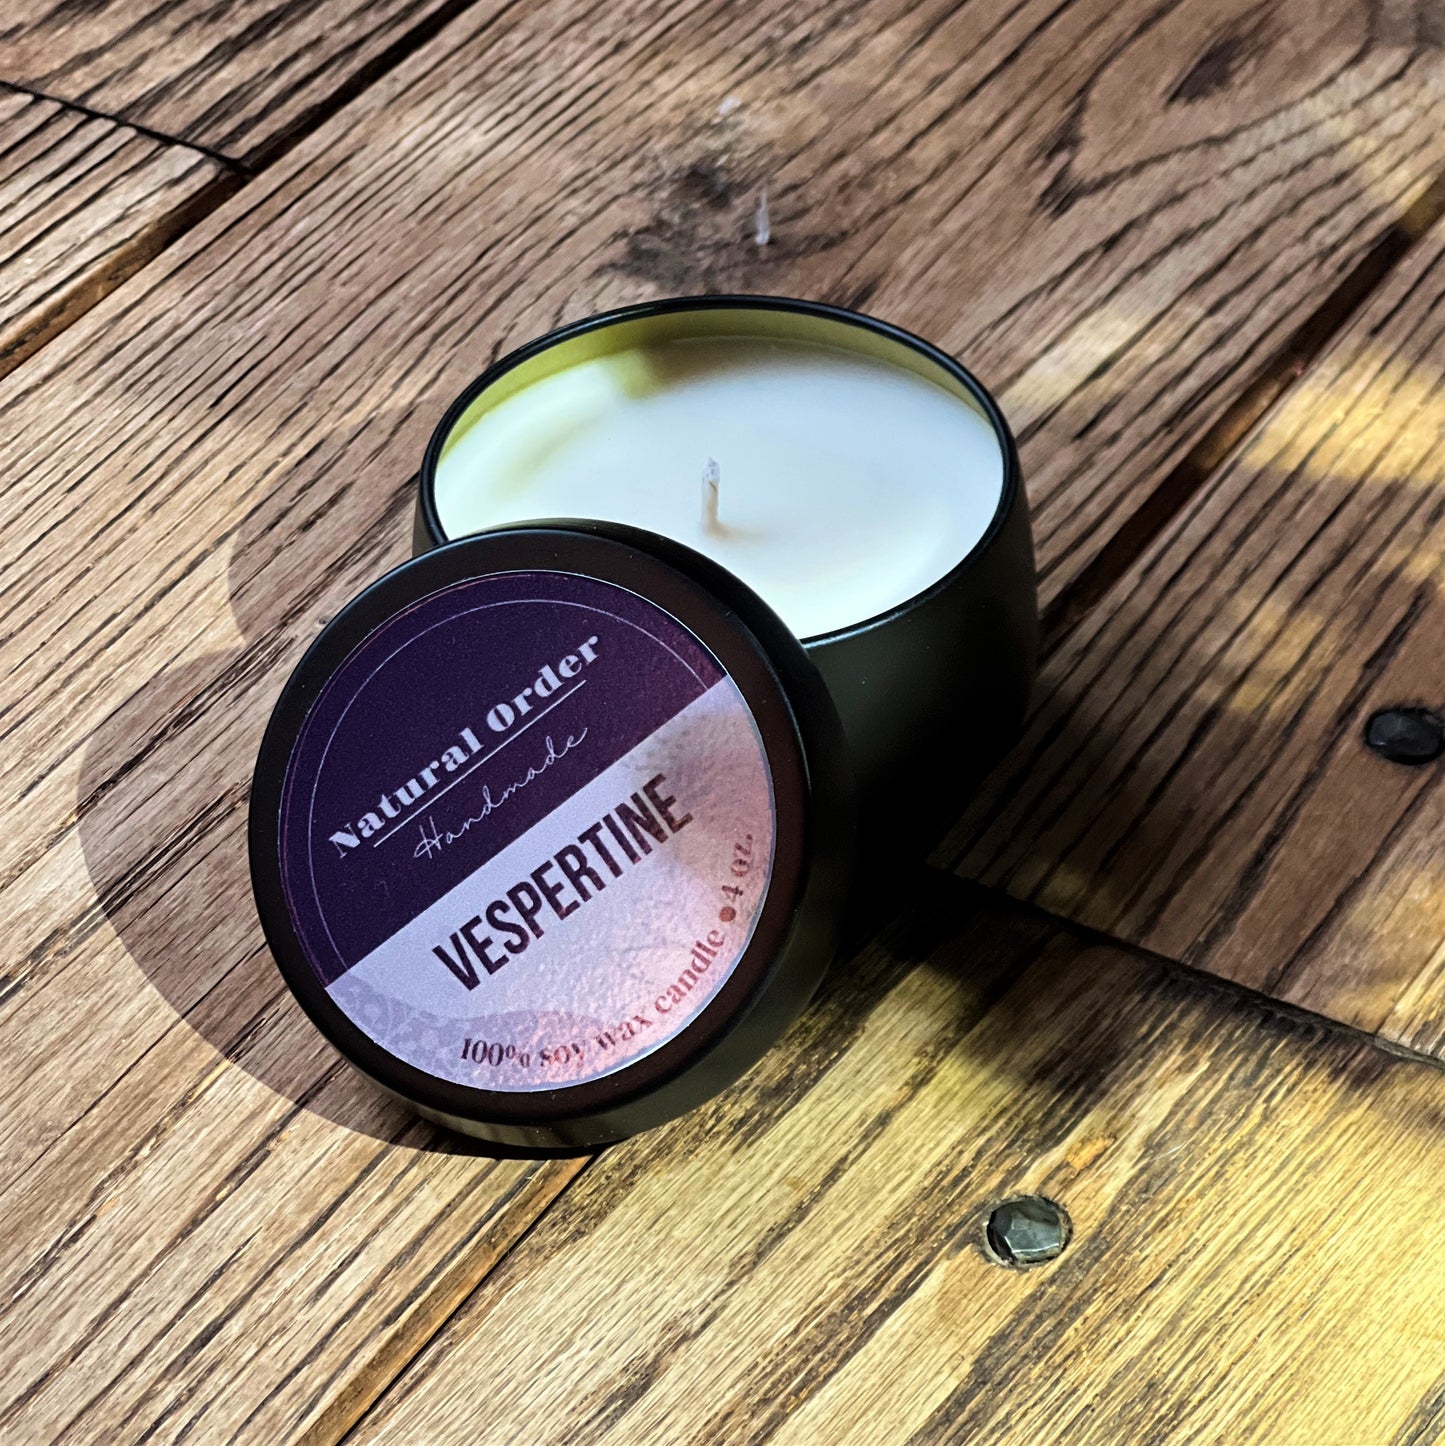 Vespertine Soy Candle 4 ounce